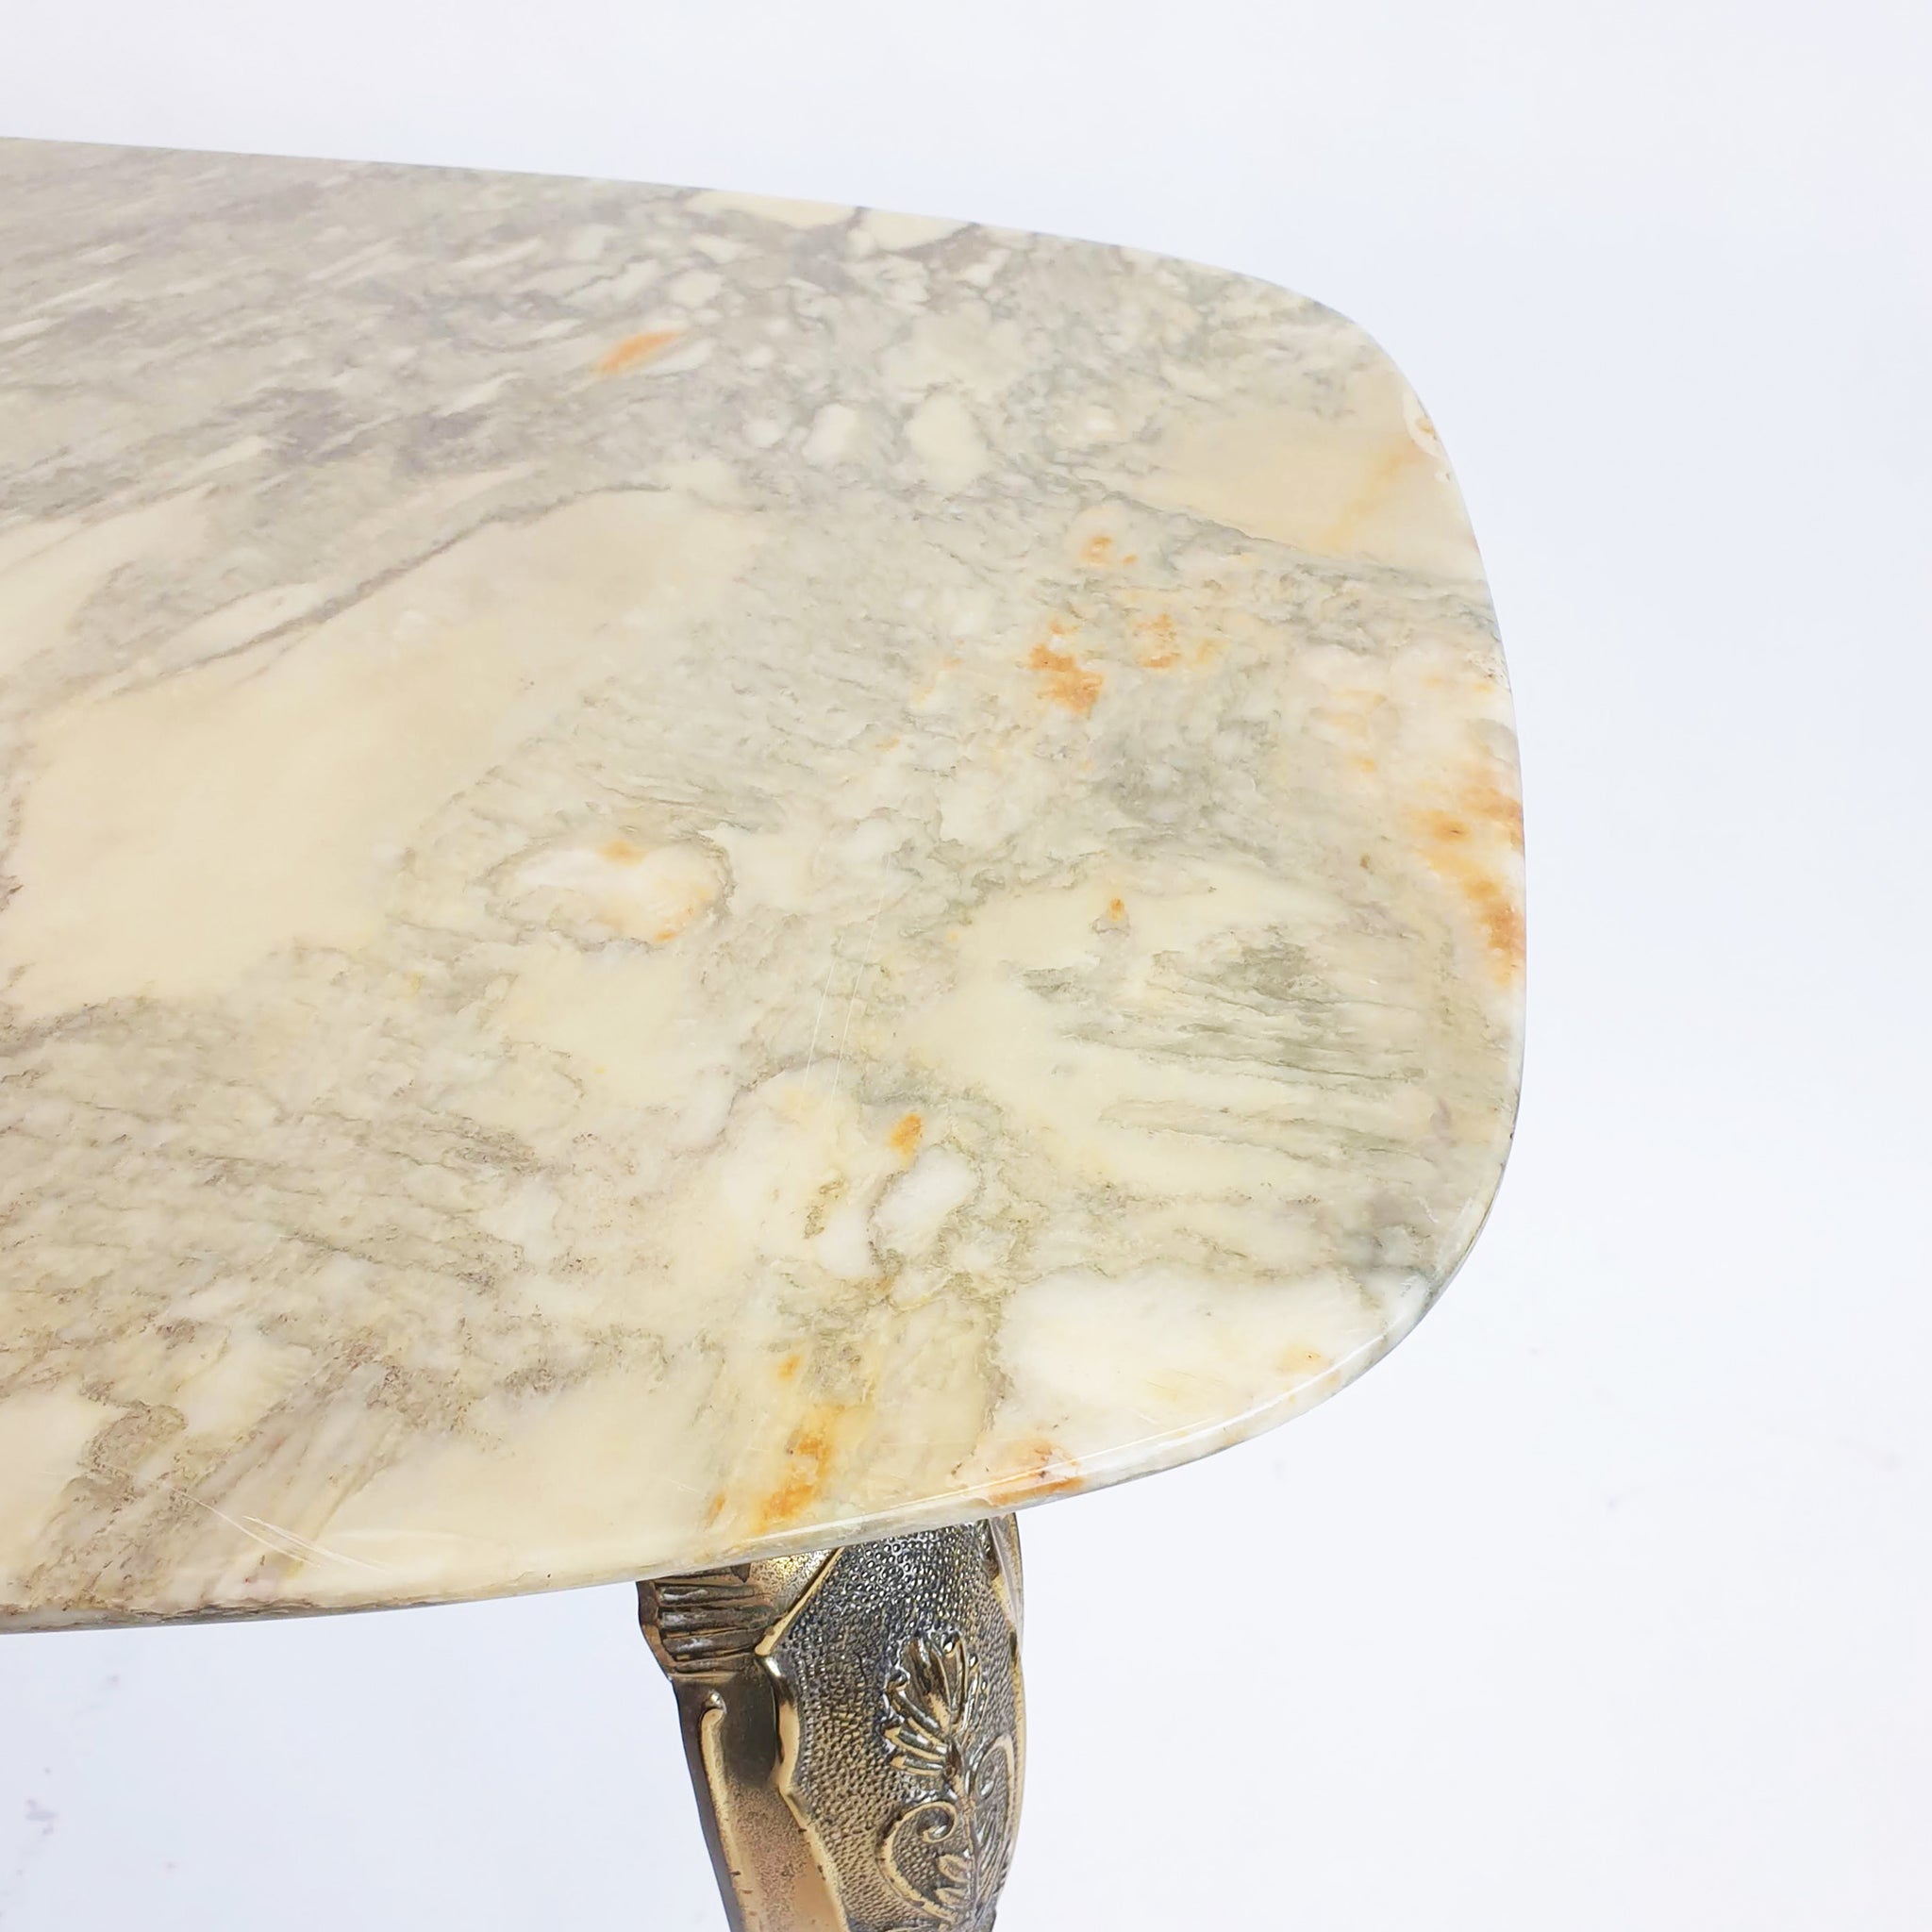 Mid-century Italian marble and brass coffee table